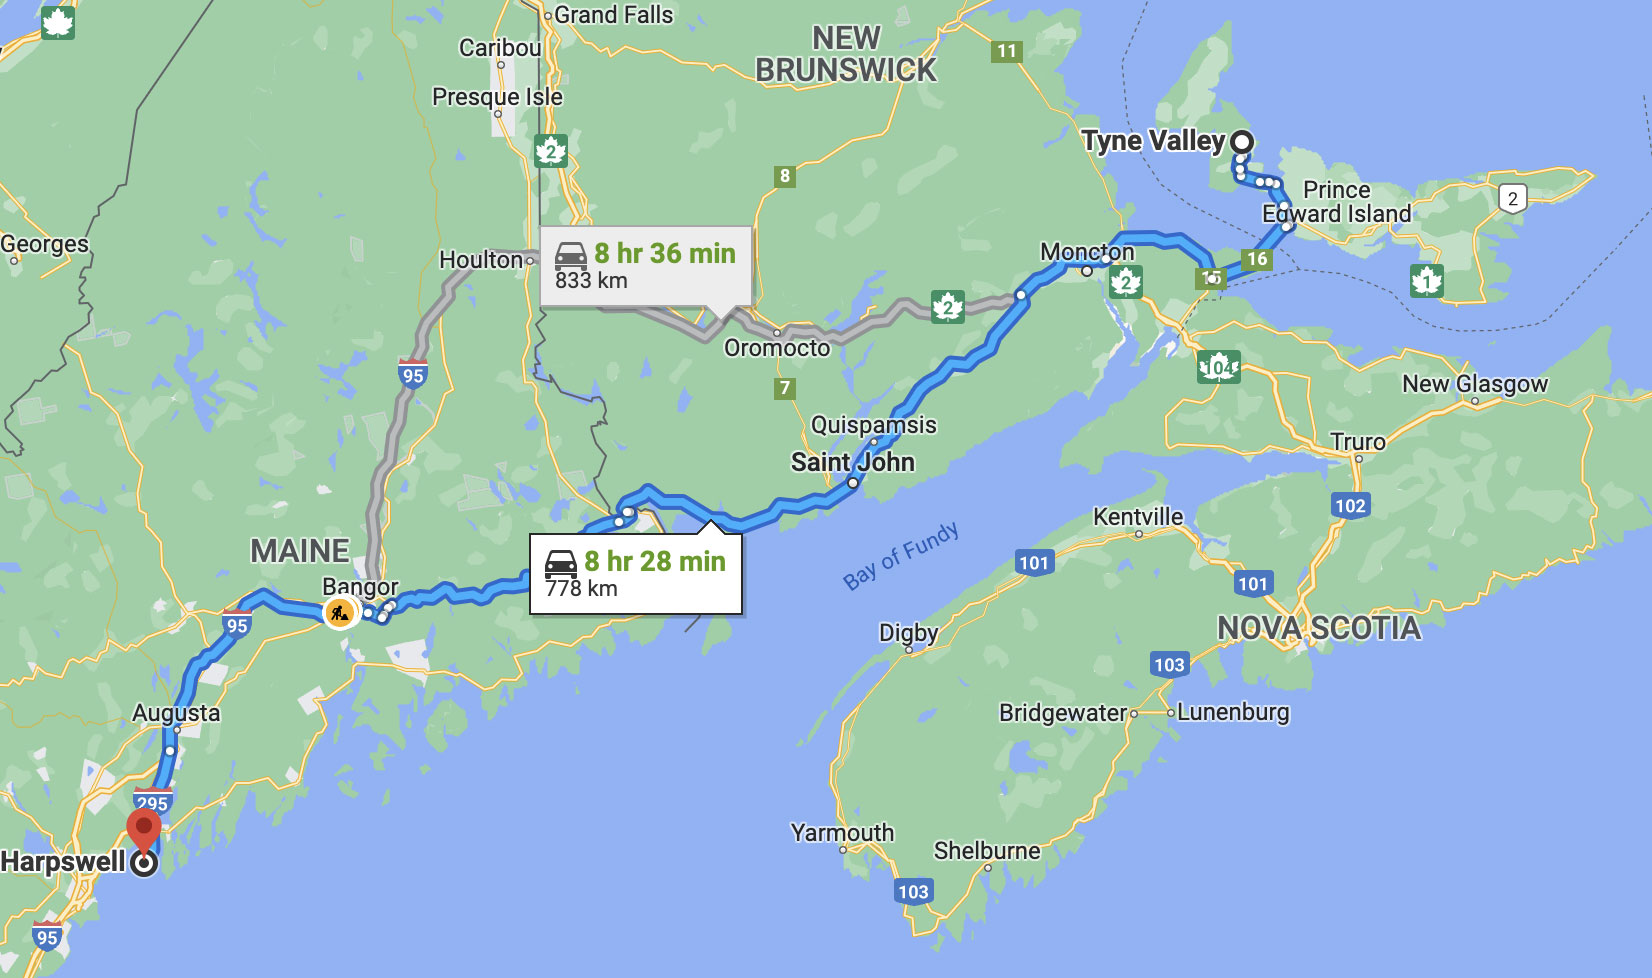 Map showing distance from Harpswell, Maine to Tyne Valley, PEI